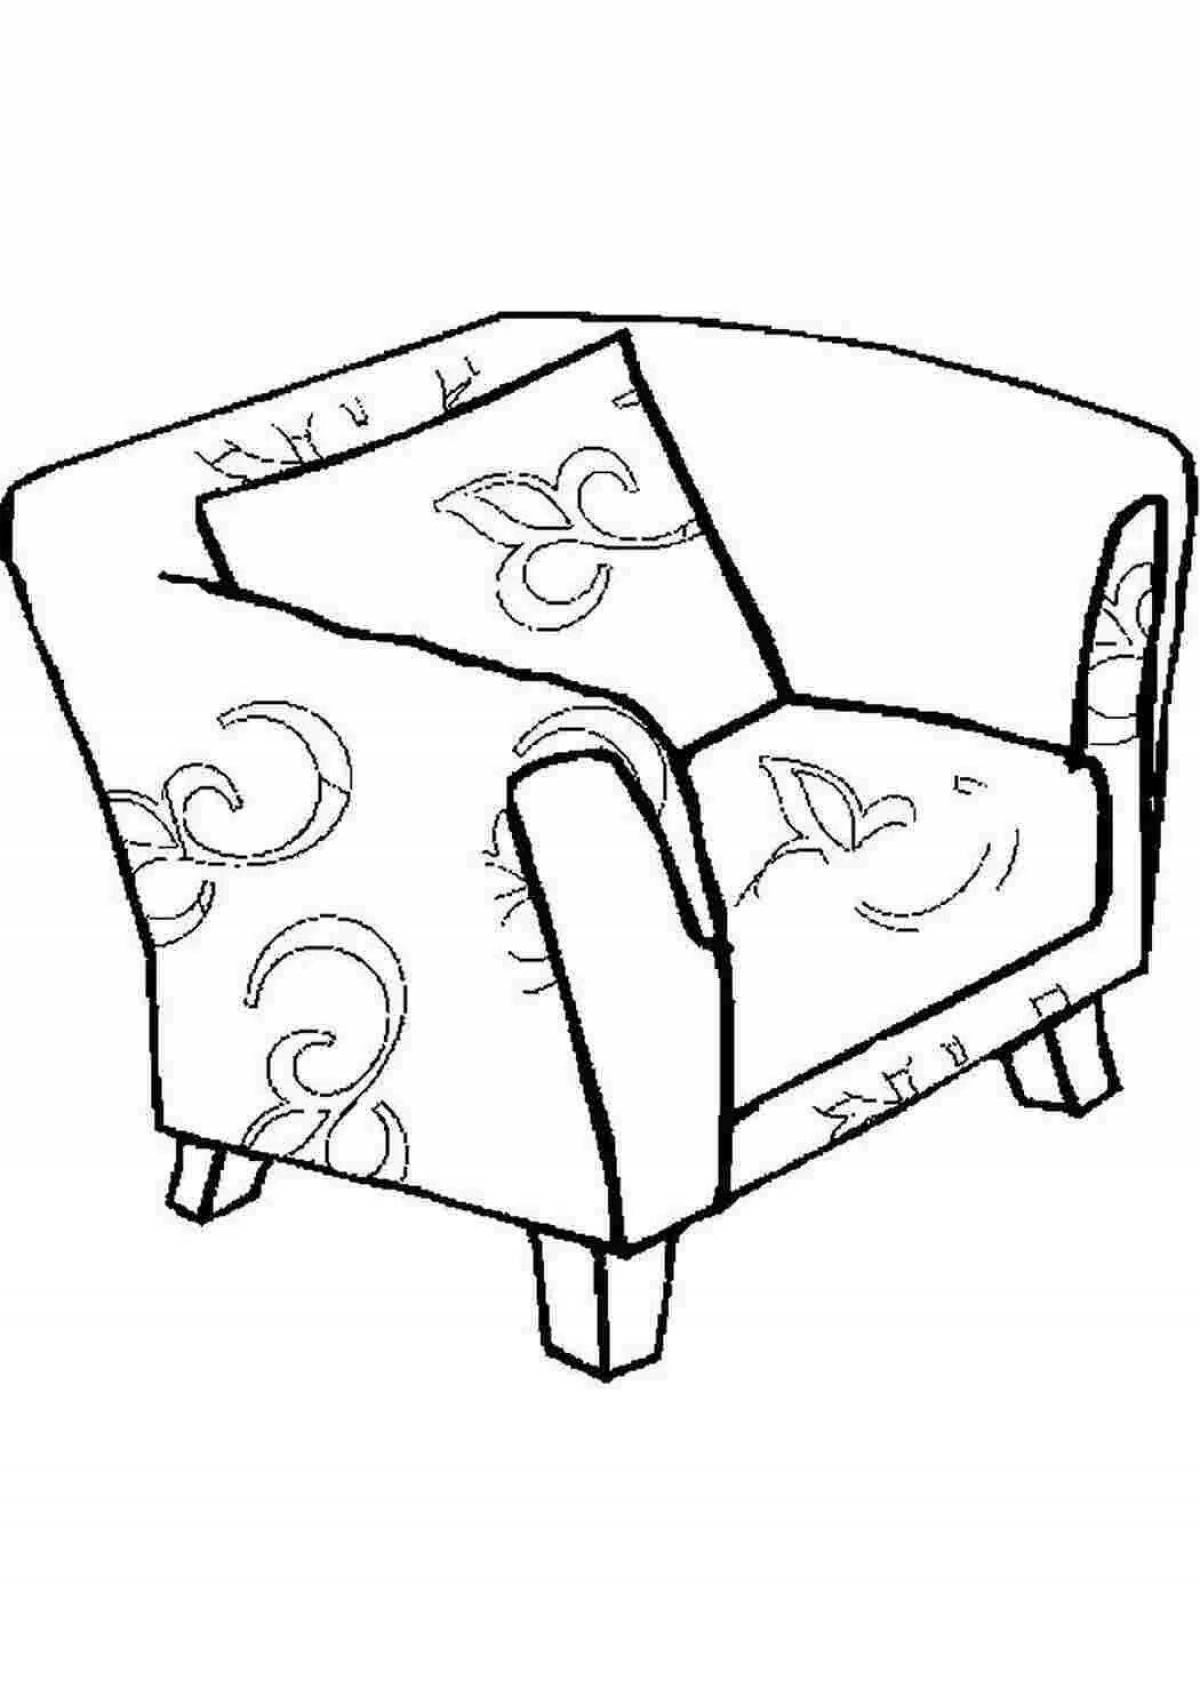 Exciting elderly furniture coloring page